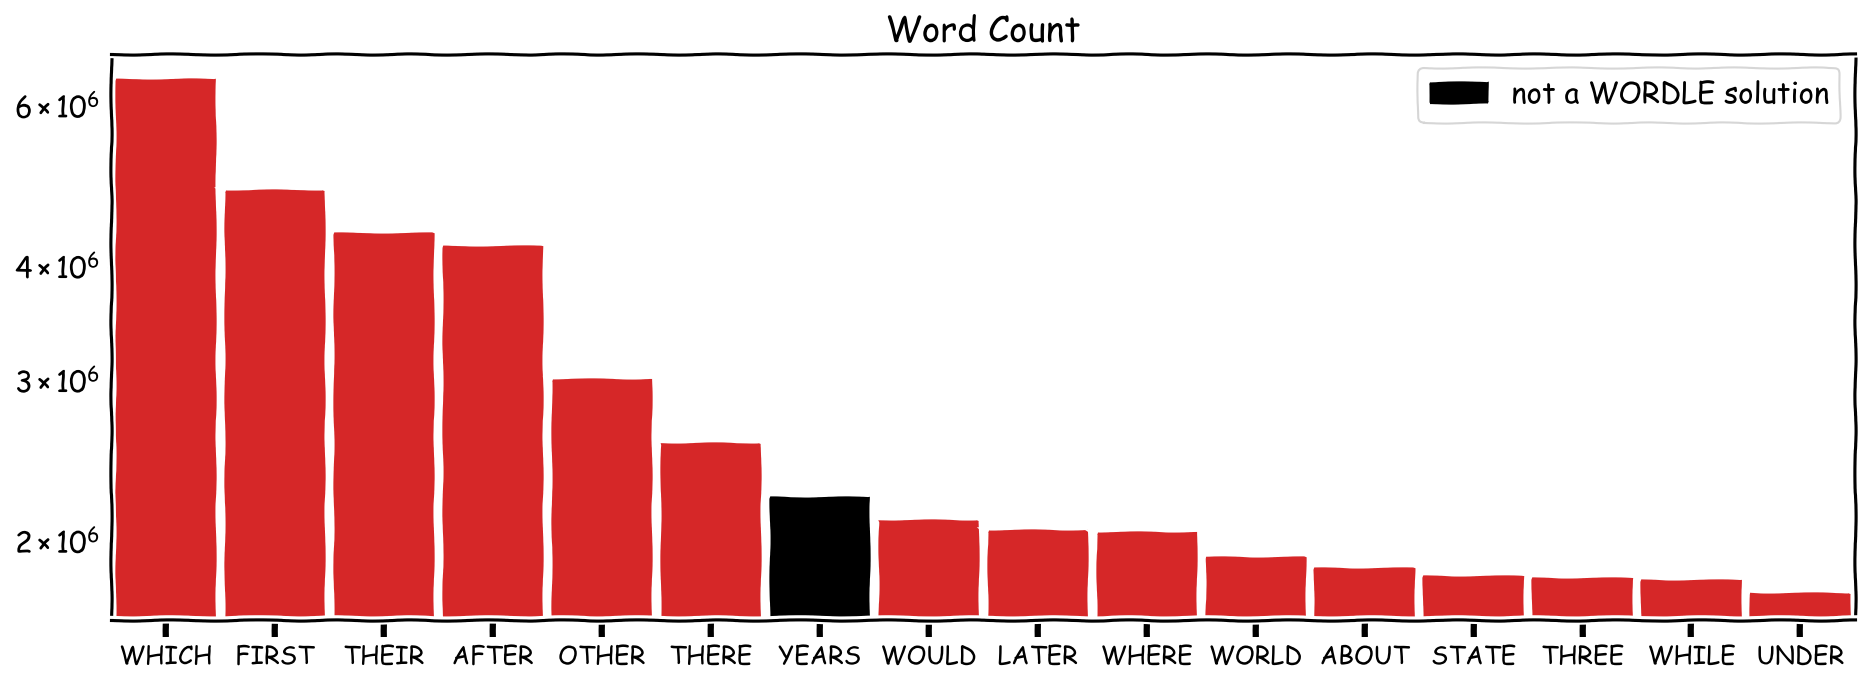 wiki_word_count_wordle_15